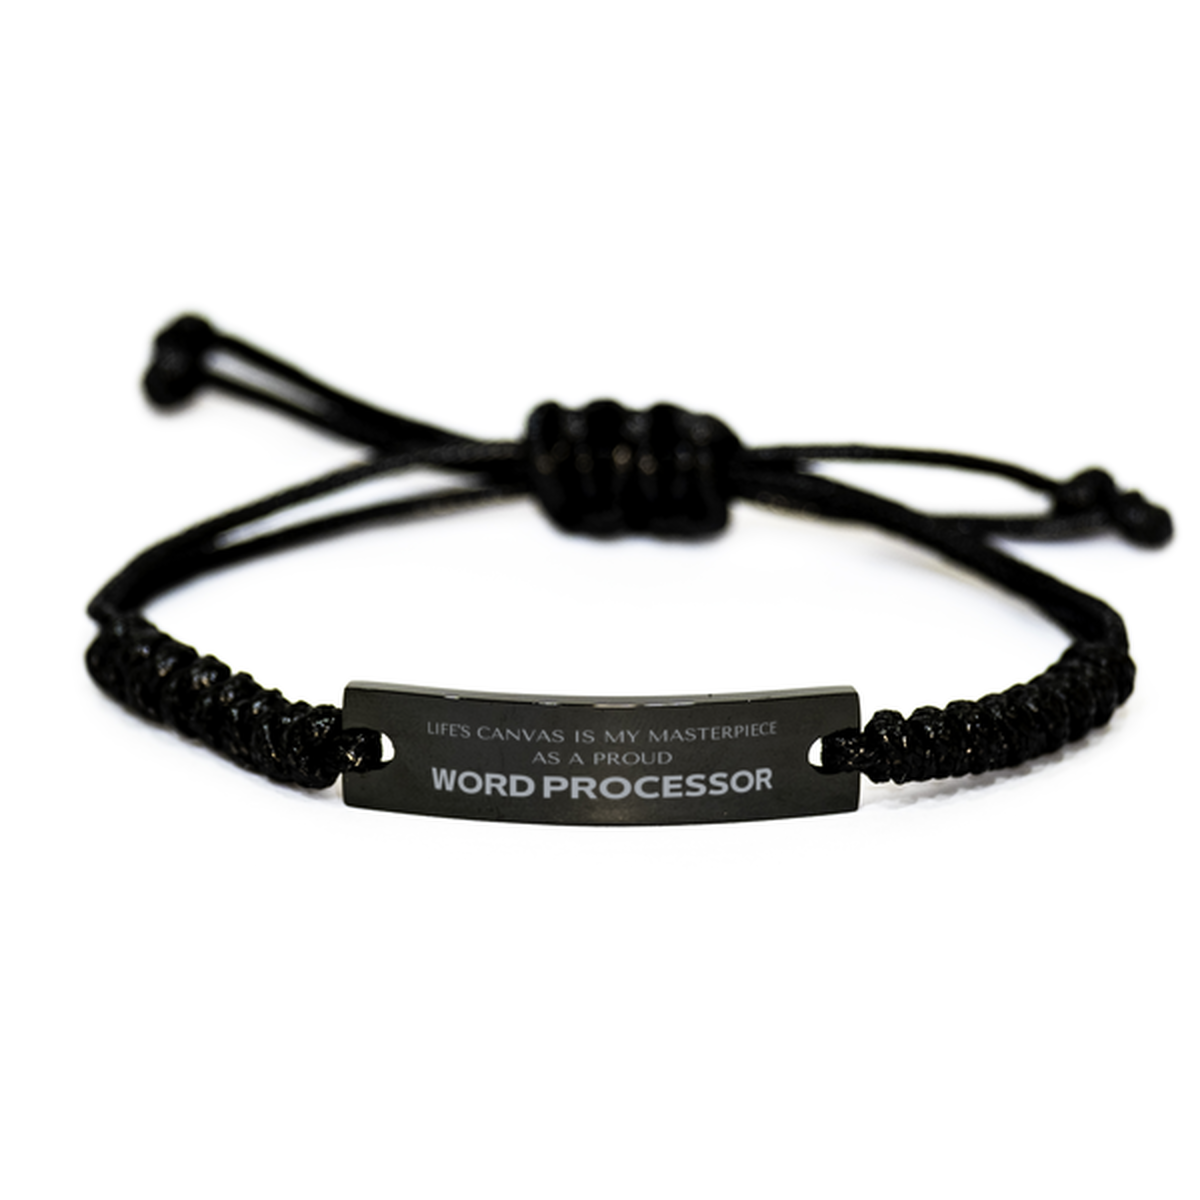 Proud Word Processor Gifts, Life's canvas is my masterpiece, Epic Birthday Christmas Unique Black Rope Bracelet For Word Processor, Coworkers, Men, Women, Friends